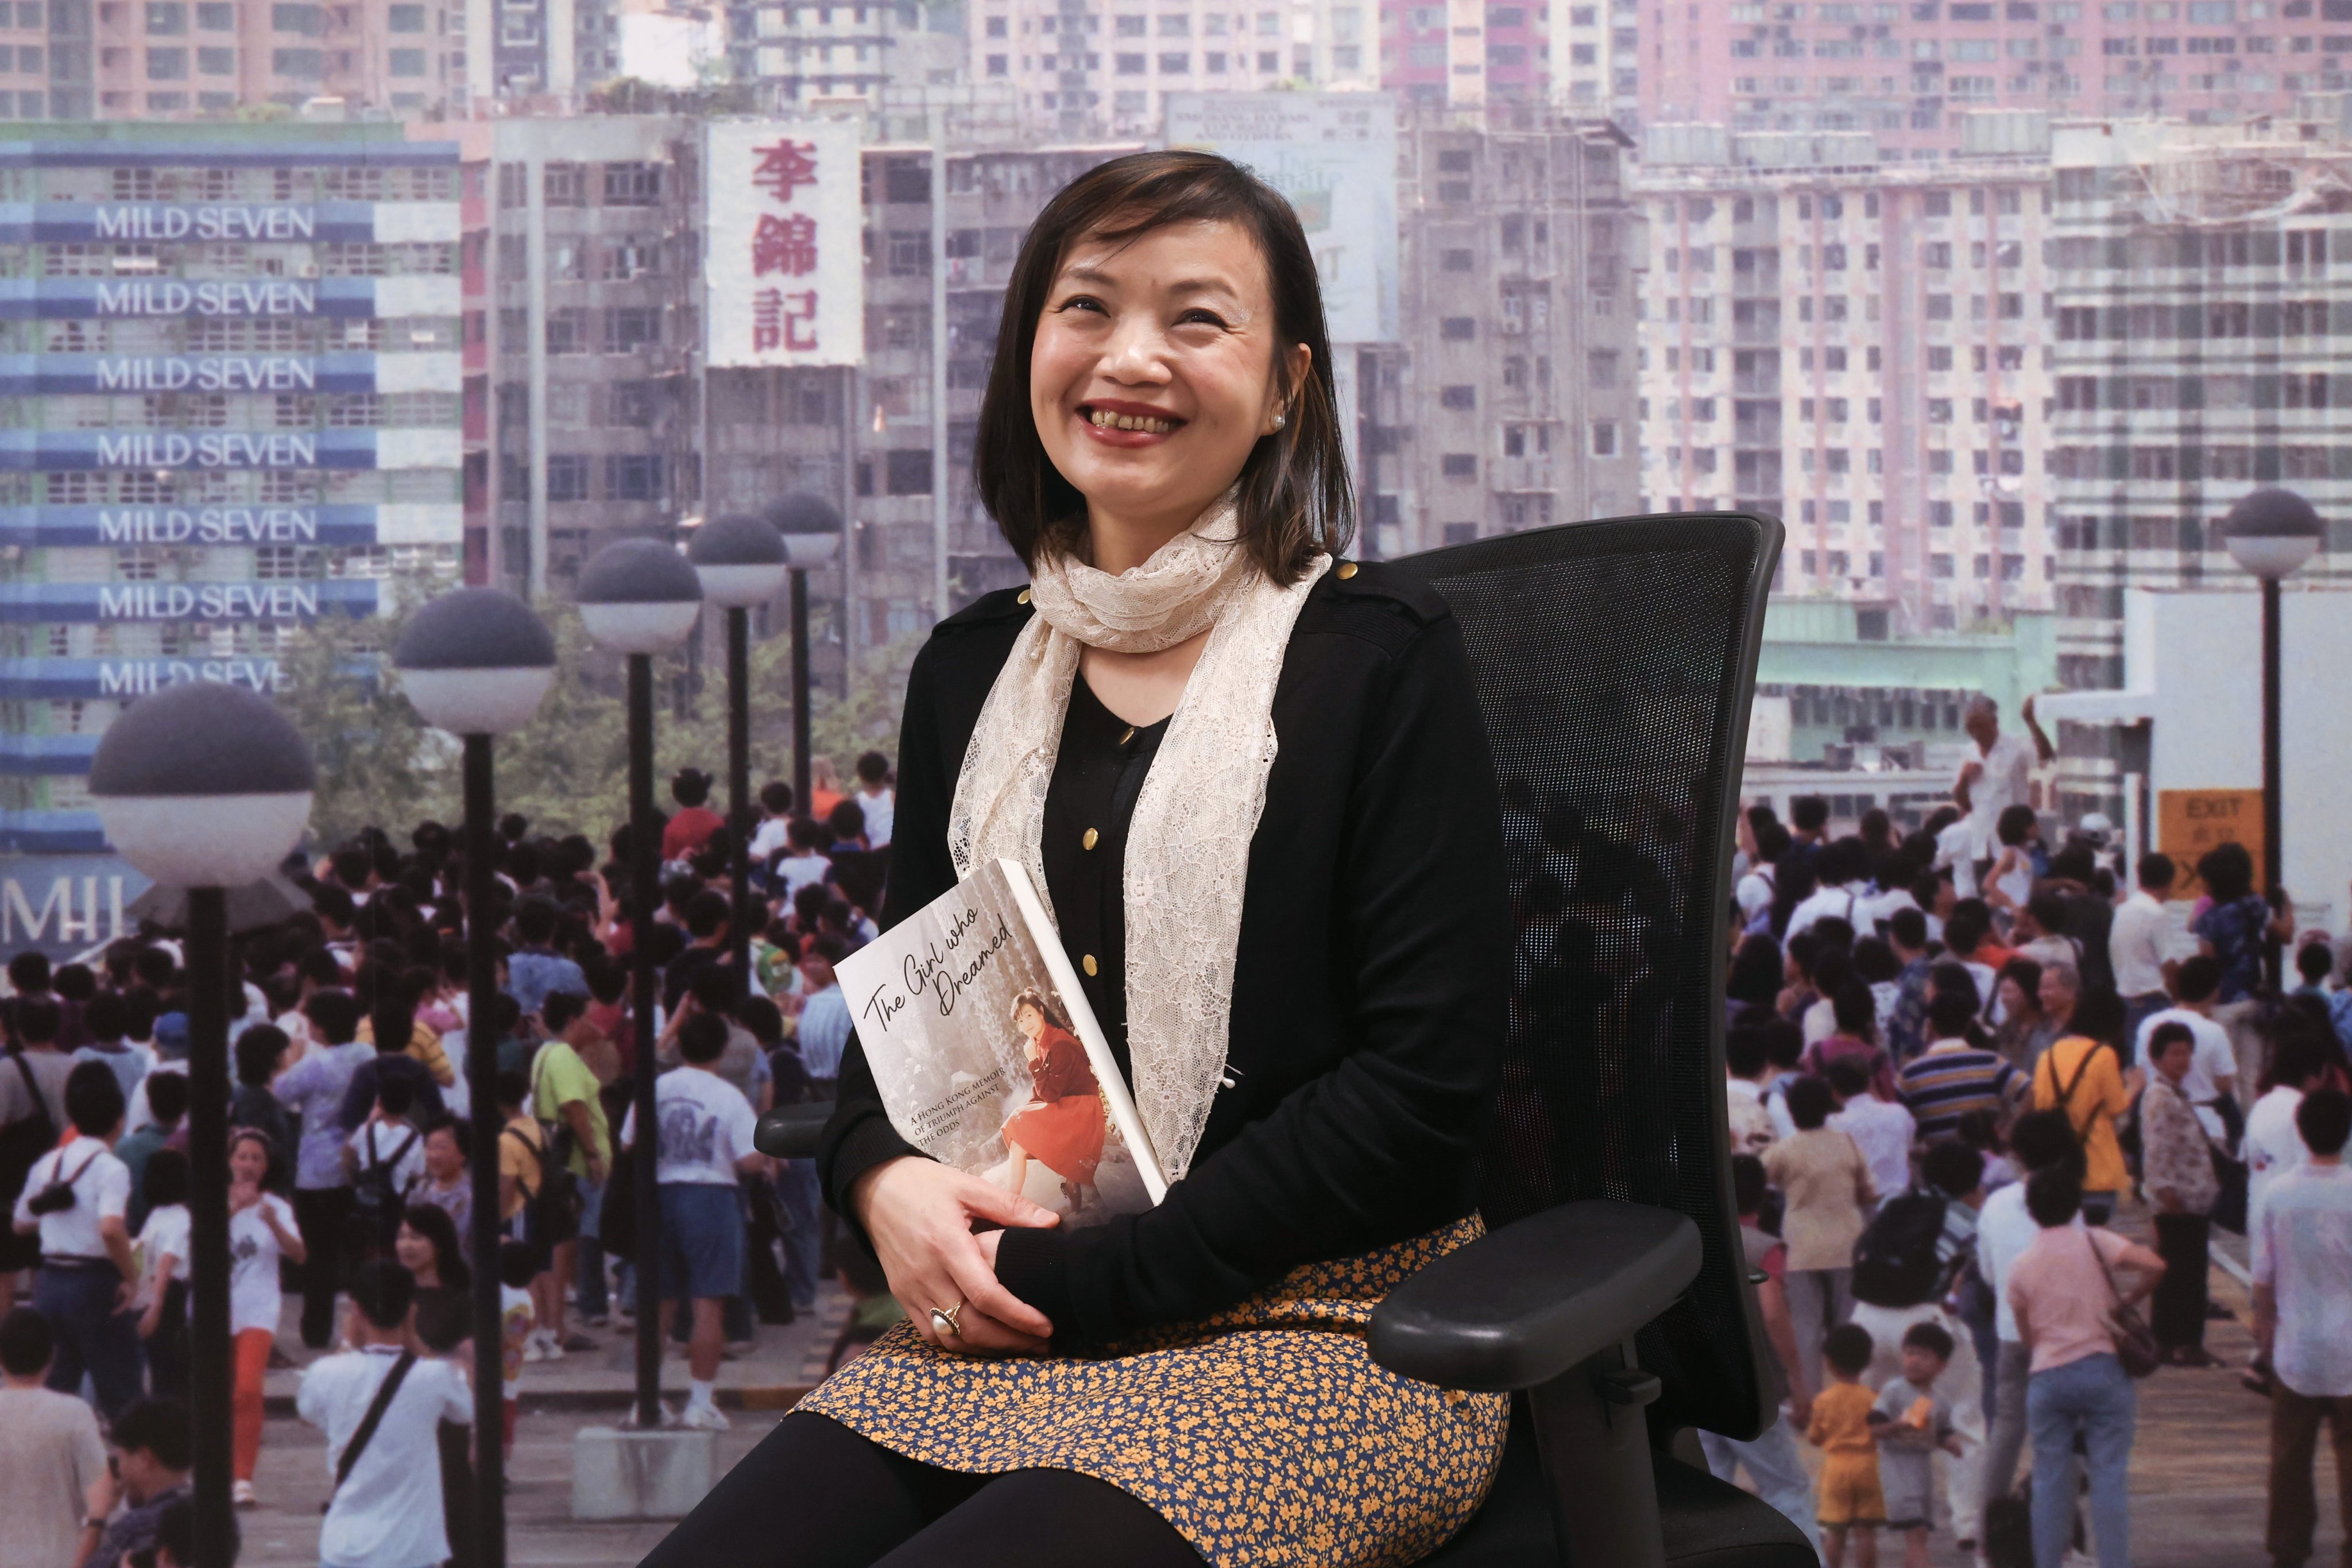 Hong Kong writer and poet Sonia Leung poses with her latest book, “The Girl Who Dreamed: A Hong Kong Memoir of Triumph Against the Odds”. Photo: Jonathan Wong